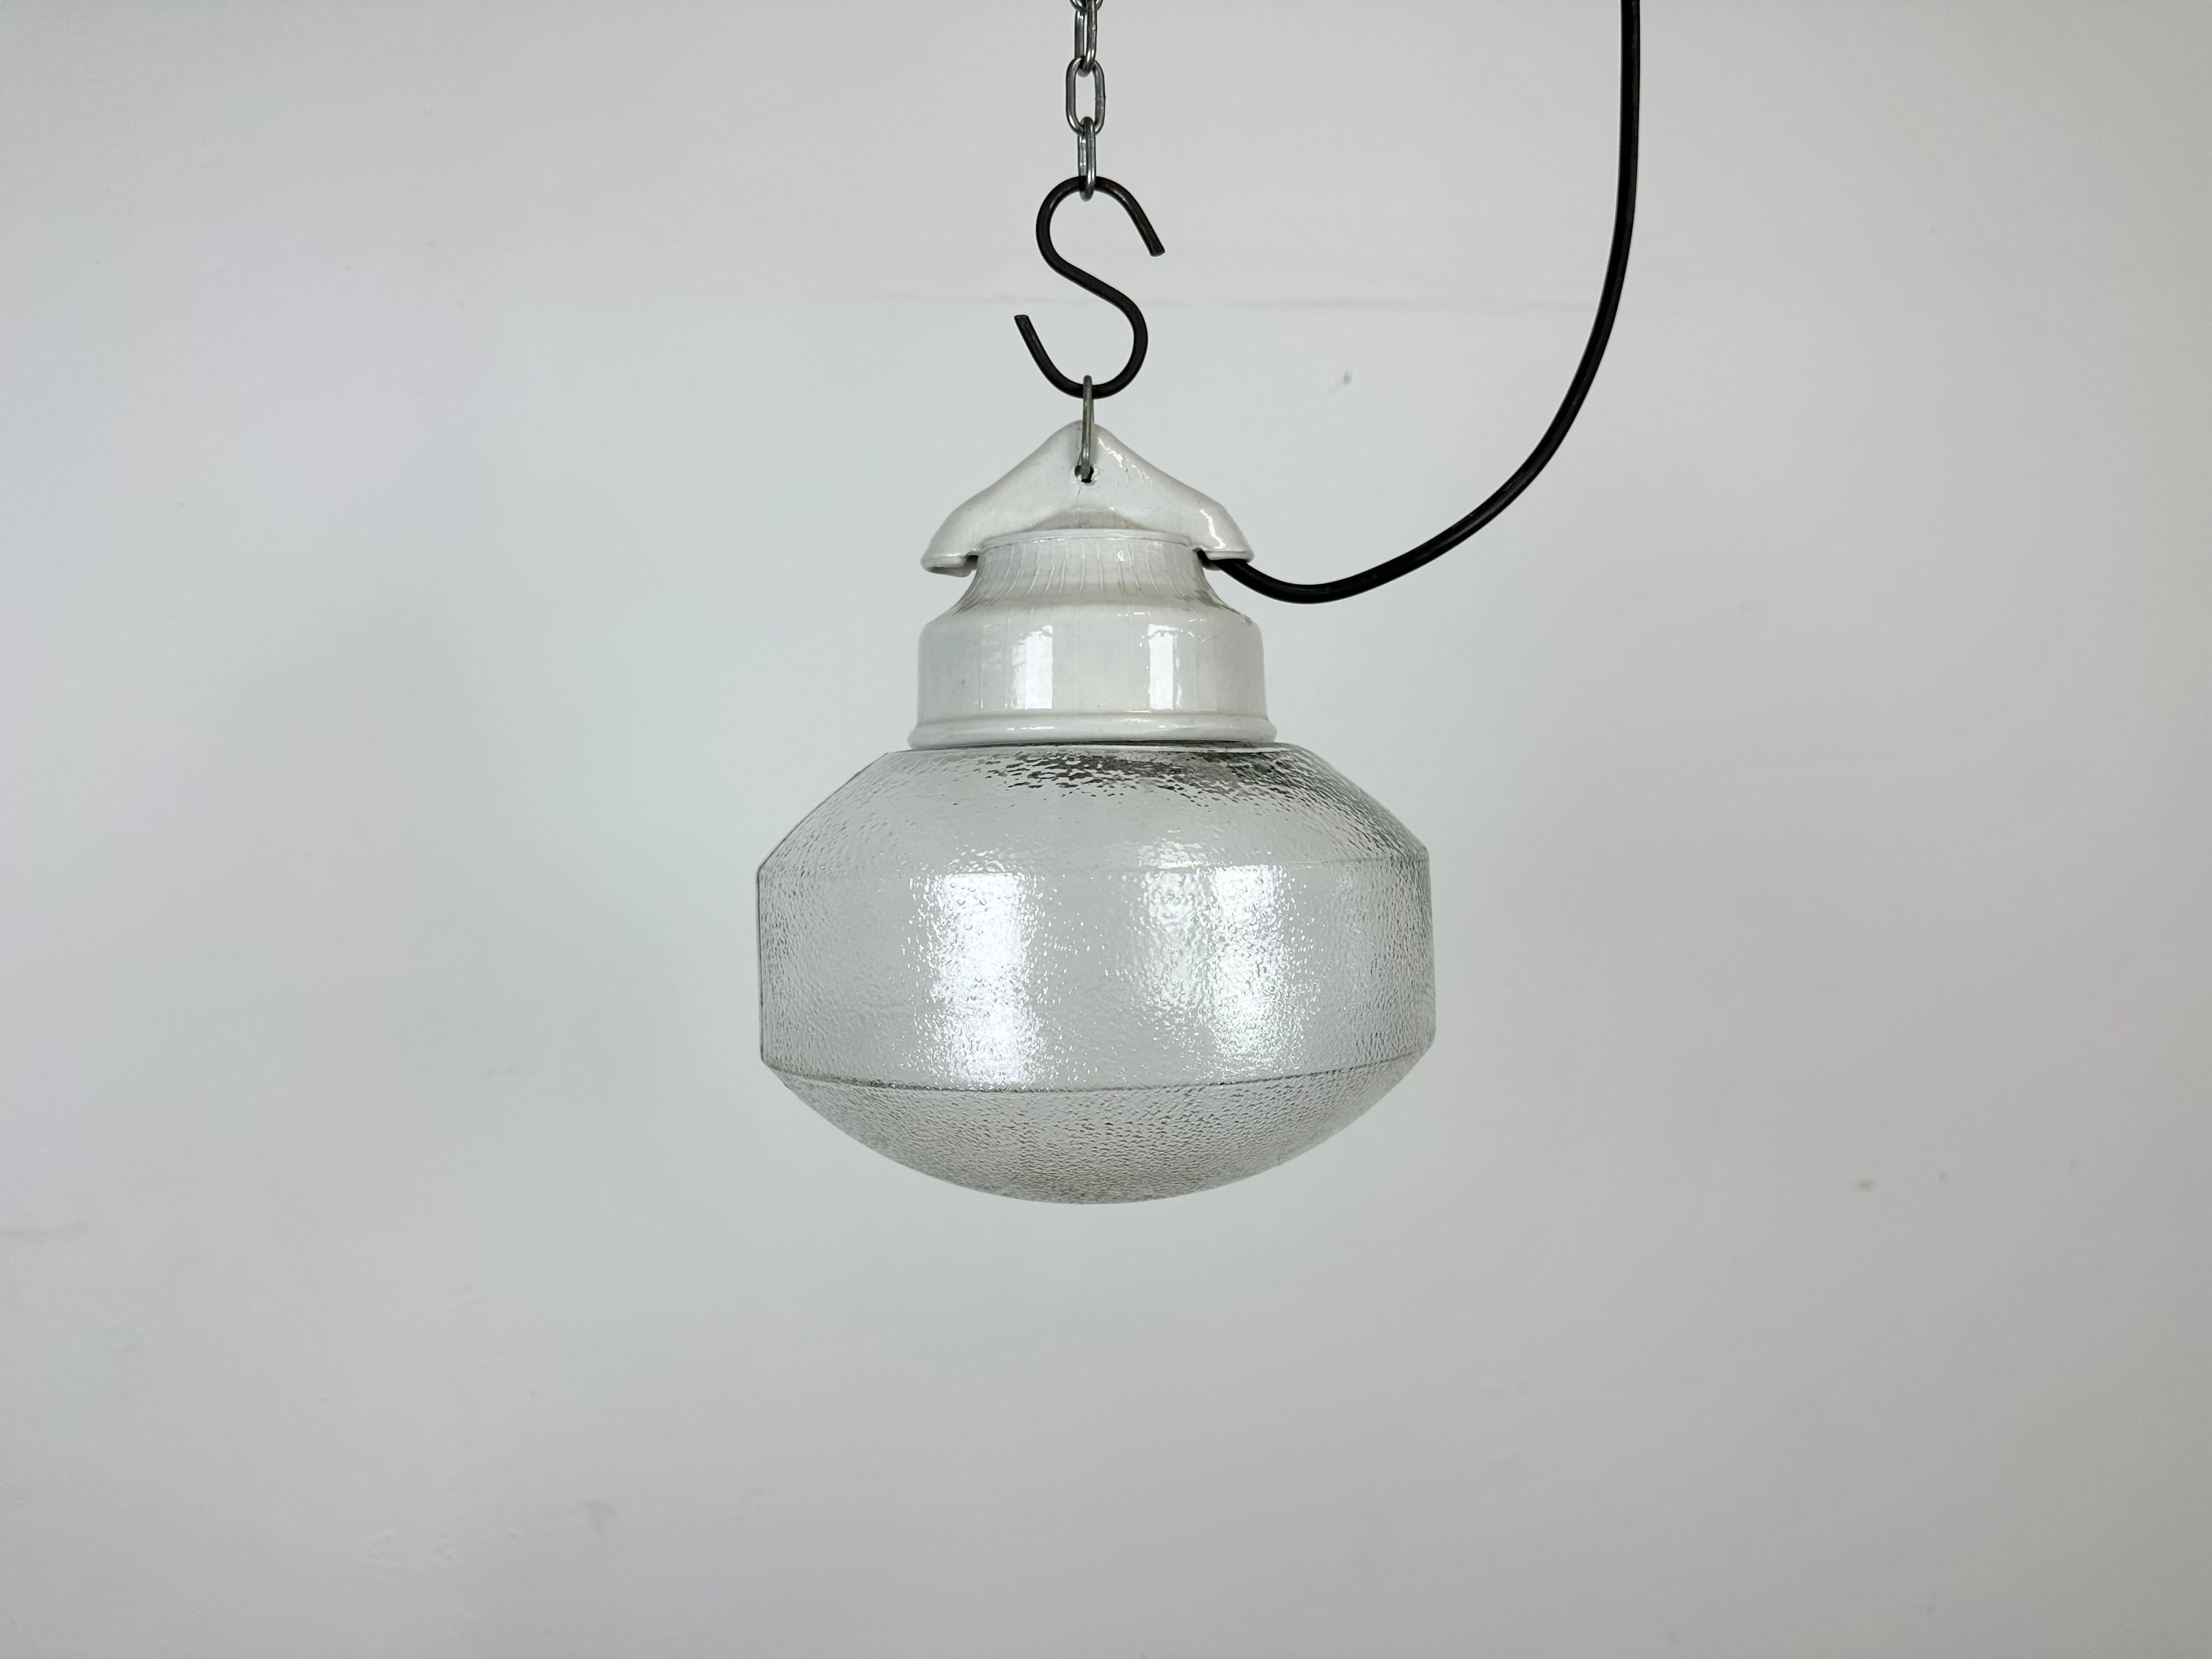 Vintage industrial light made in Poland during the 1970s. It features a white porcelain top and a frosted glass cover. The socket requires E27/ E26 light bulbs. New wire. The weight of the light is 1,2 kg.
Dimensions:
Diameter of the porcelain : 10